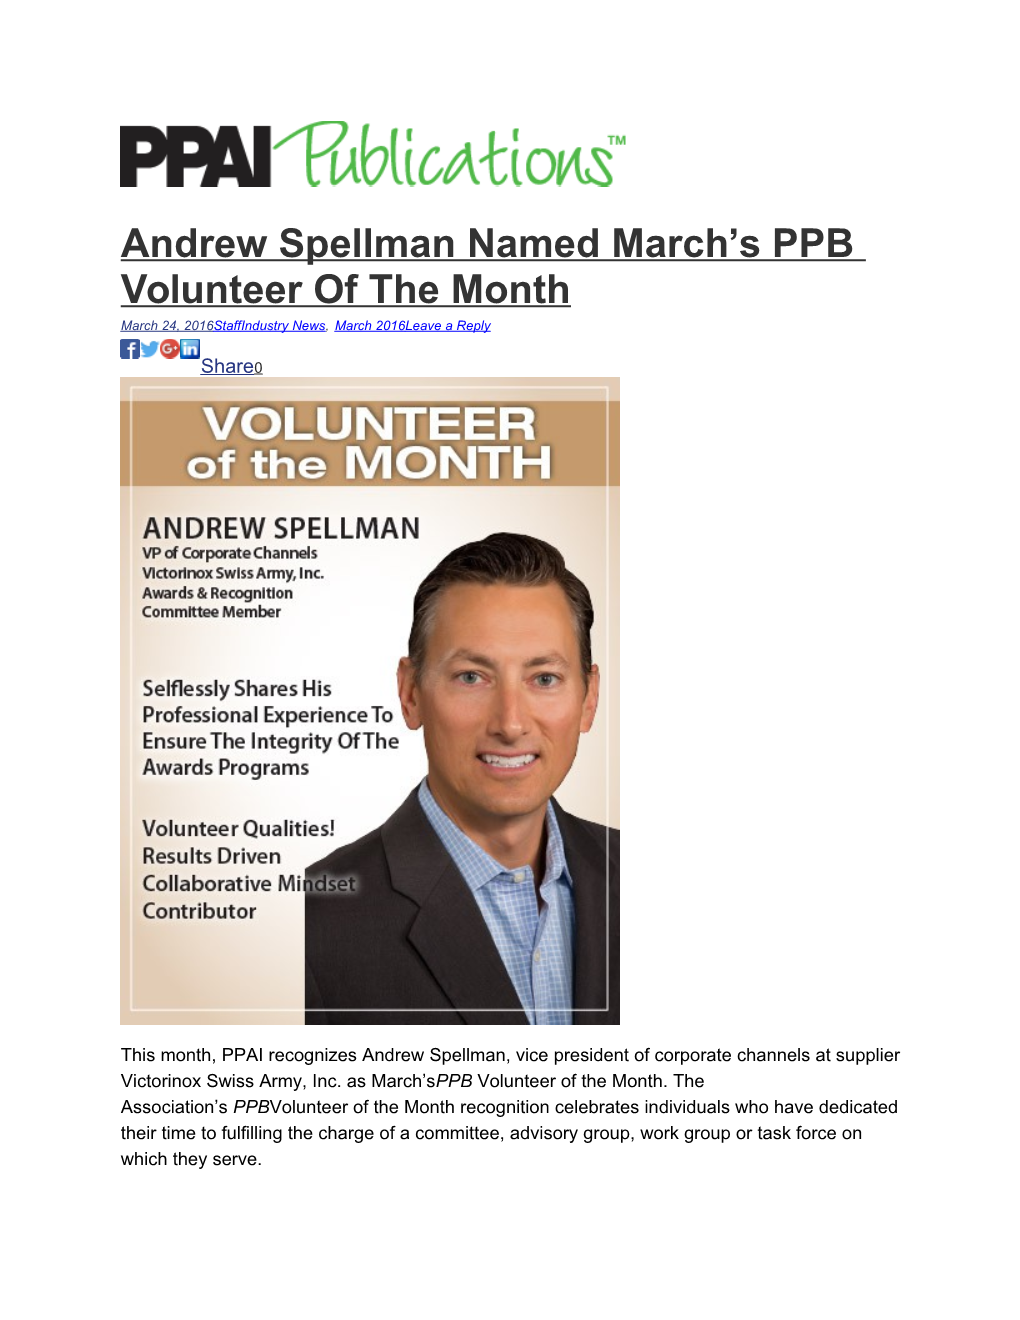 Andrew Spellman Named March S PPB Volunteer of the Month